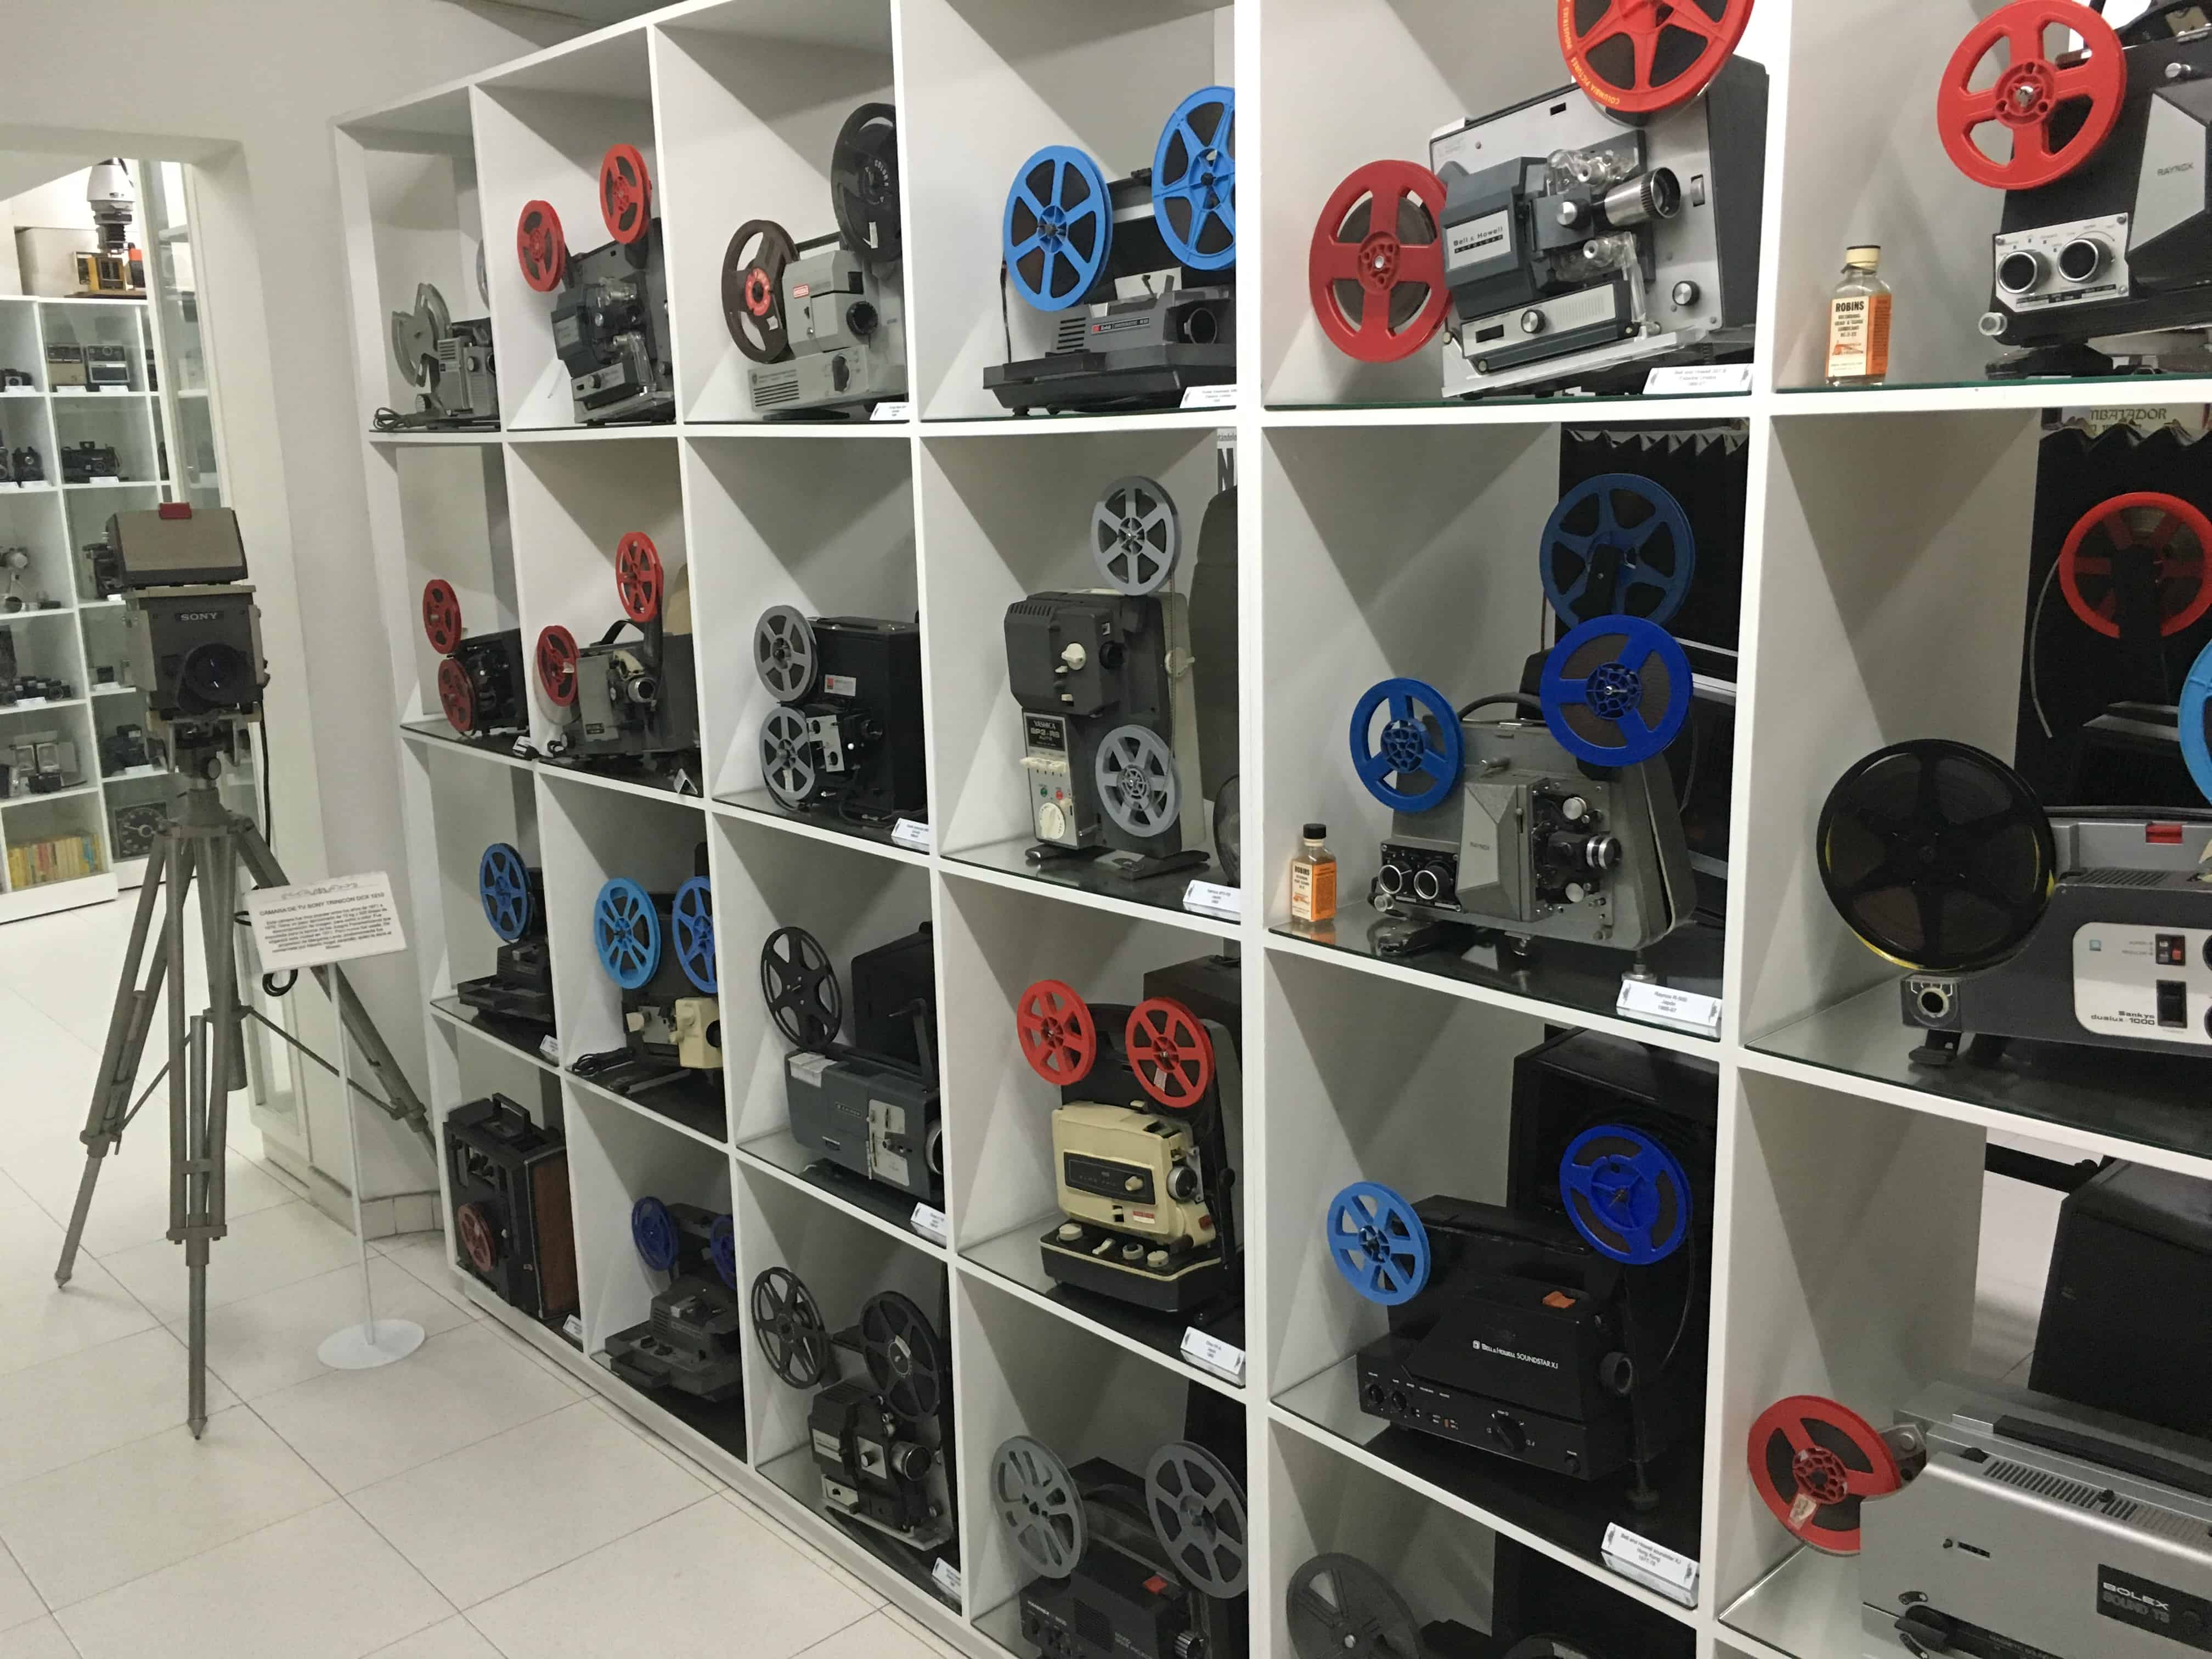 Home projectors at Caliwood in Cali, Colombia